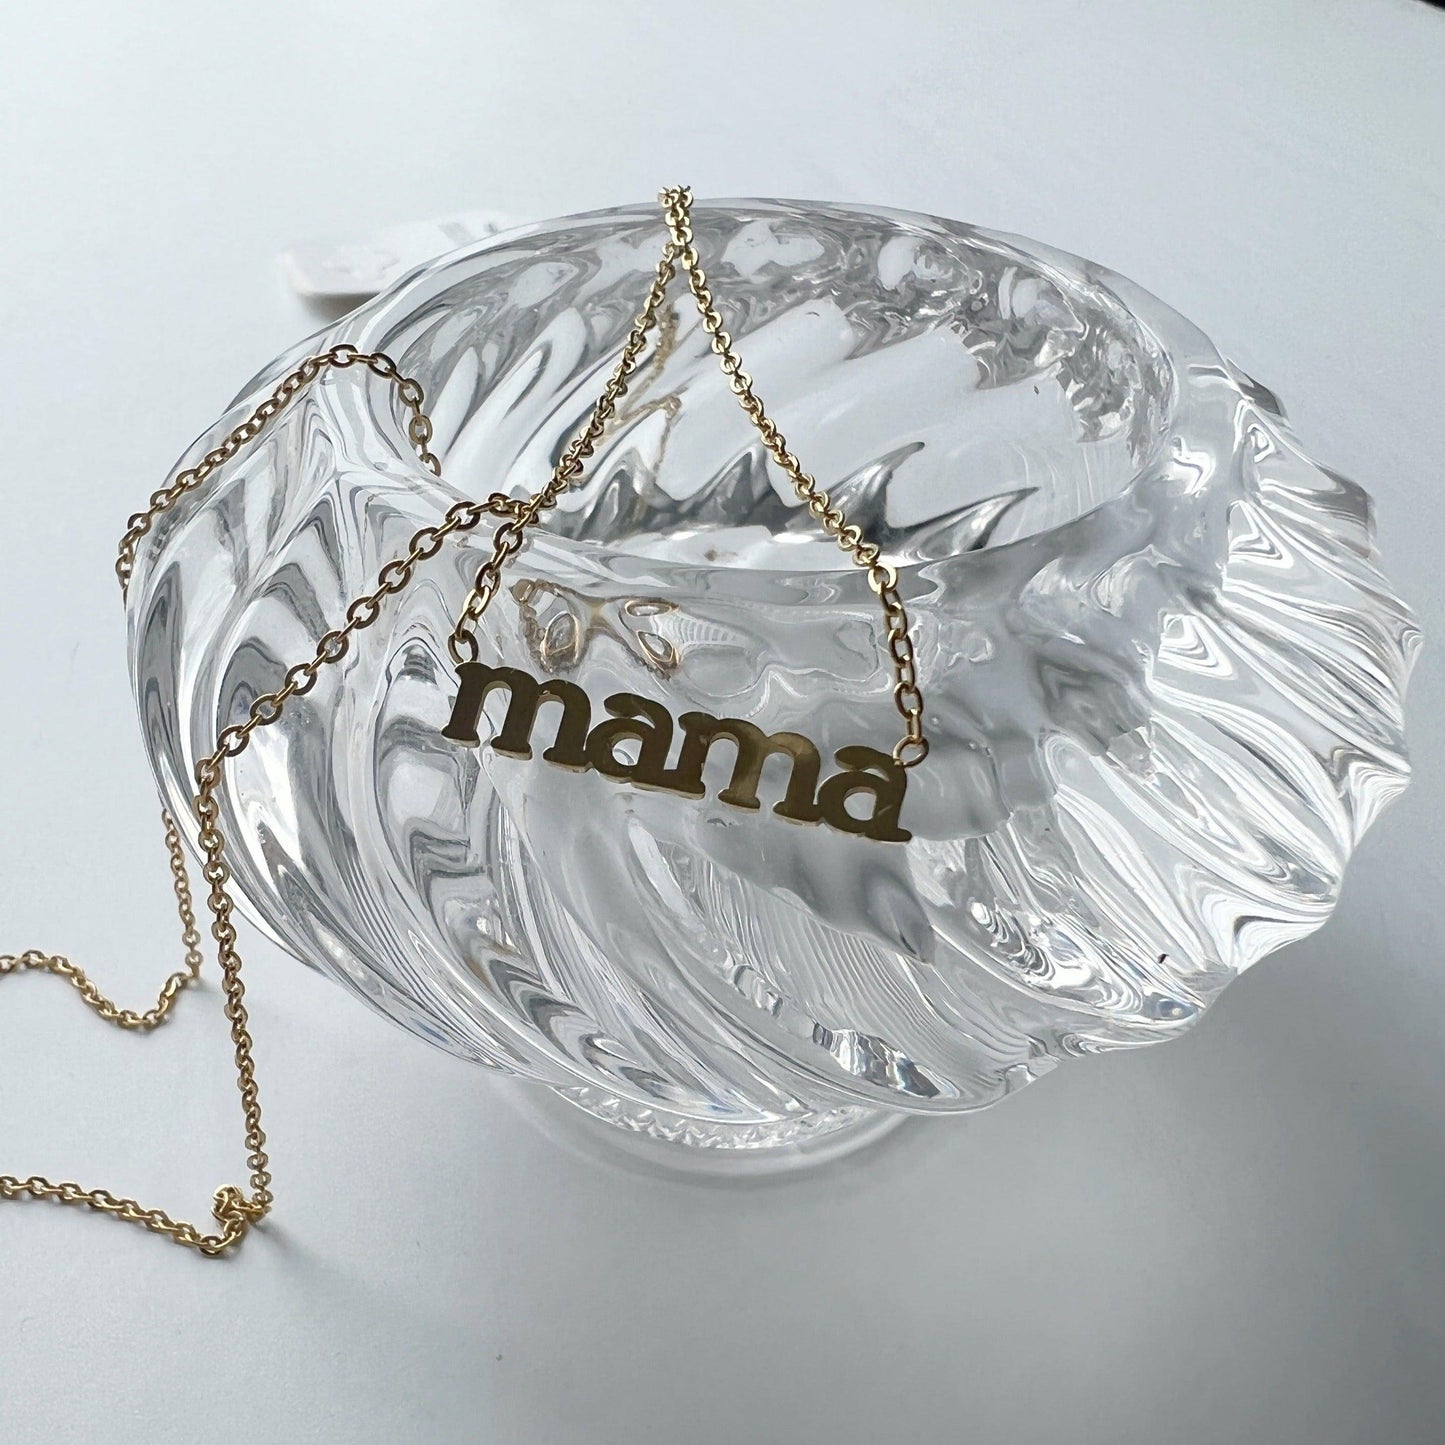 mama Necklace - JESSA JEWELRY | GOLD JEWELRY; dainty, affordable gold everyday jewelry. Tarnish free, water-resistant, hypoallergenic. Jewelry for everyday wear